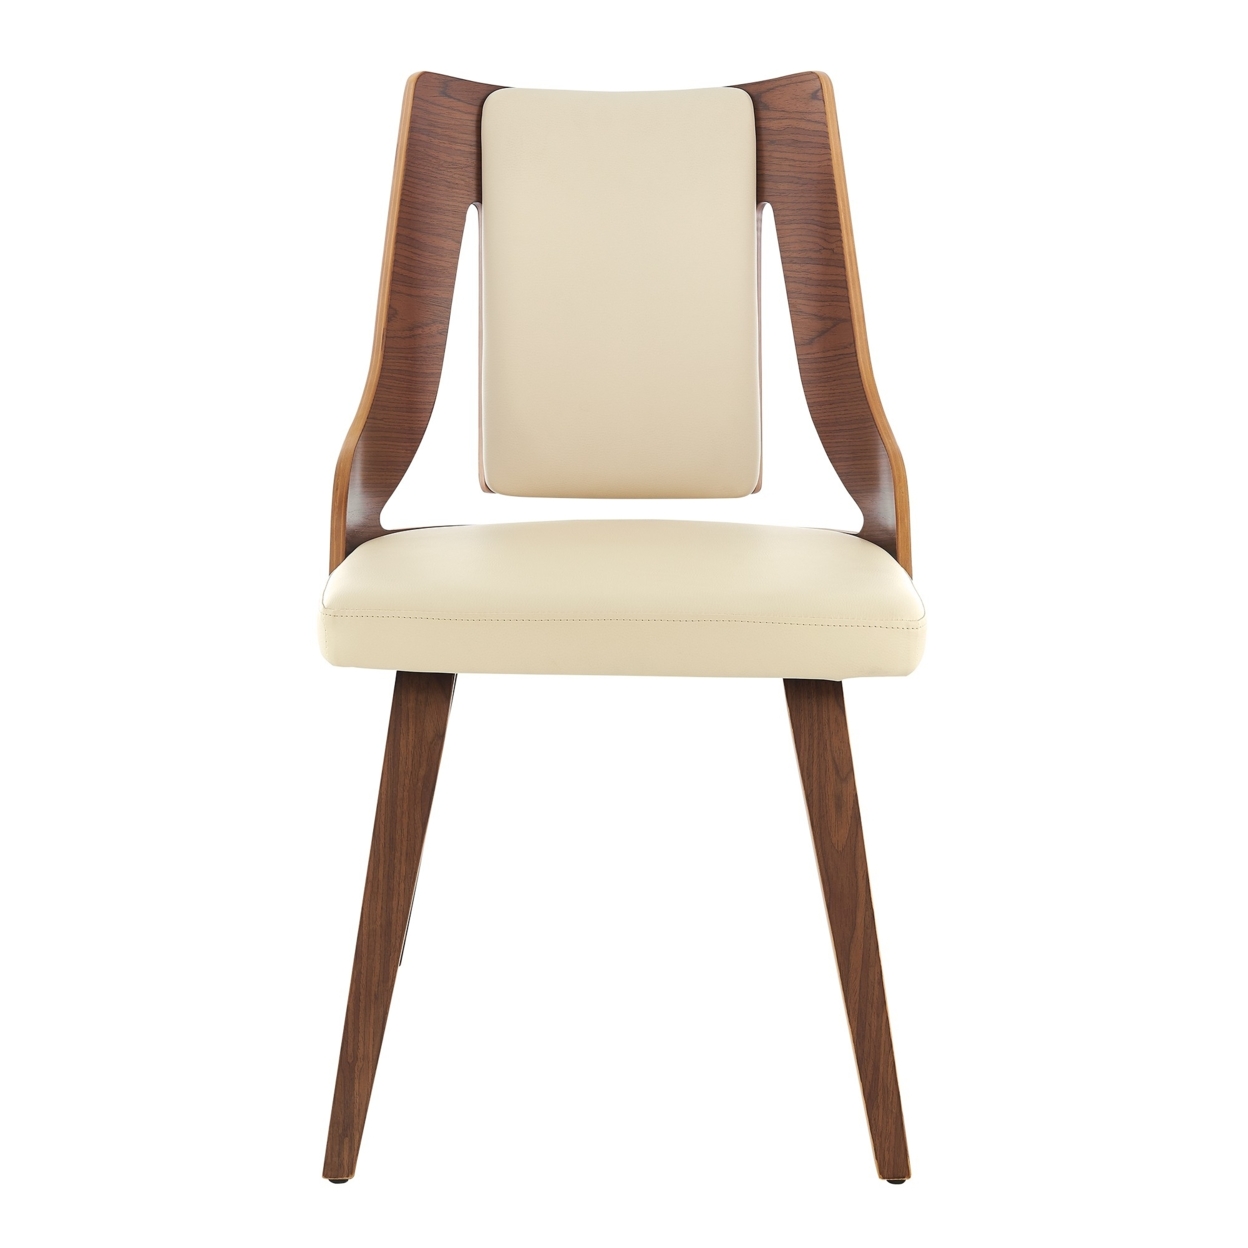 Aniston Cream Faux Leather And Walnut Wood Dining Chairs - Set Of 2- Saltoro Sherpi